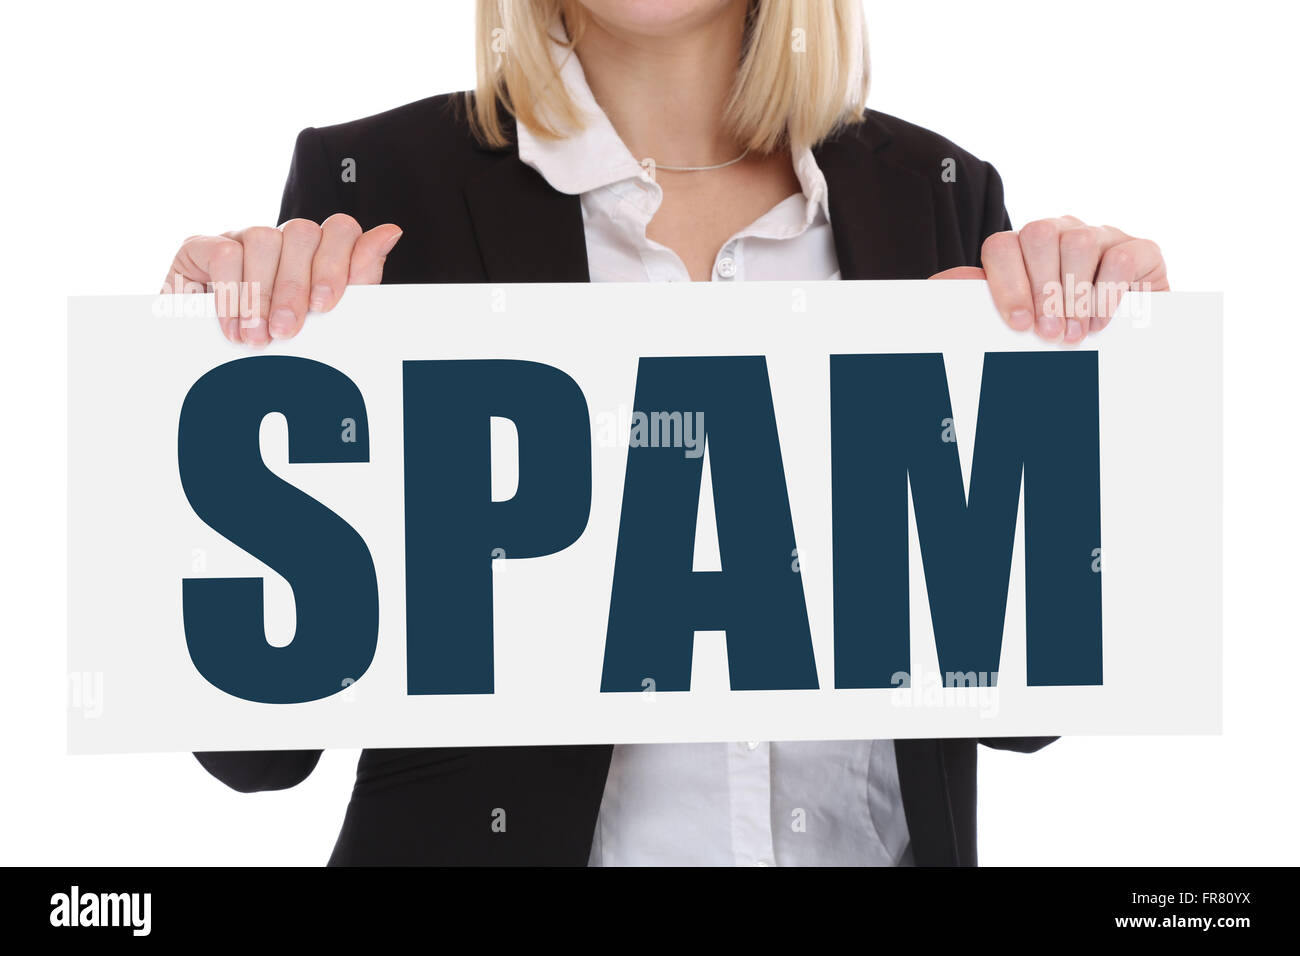 Sending Spam Mail E-Mail via internet business concept on computer Stock Photo